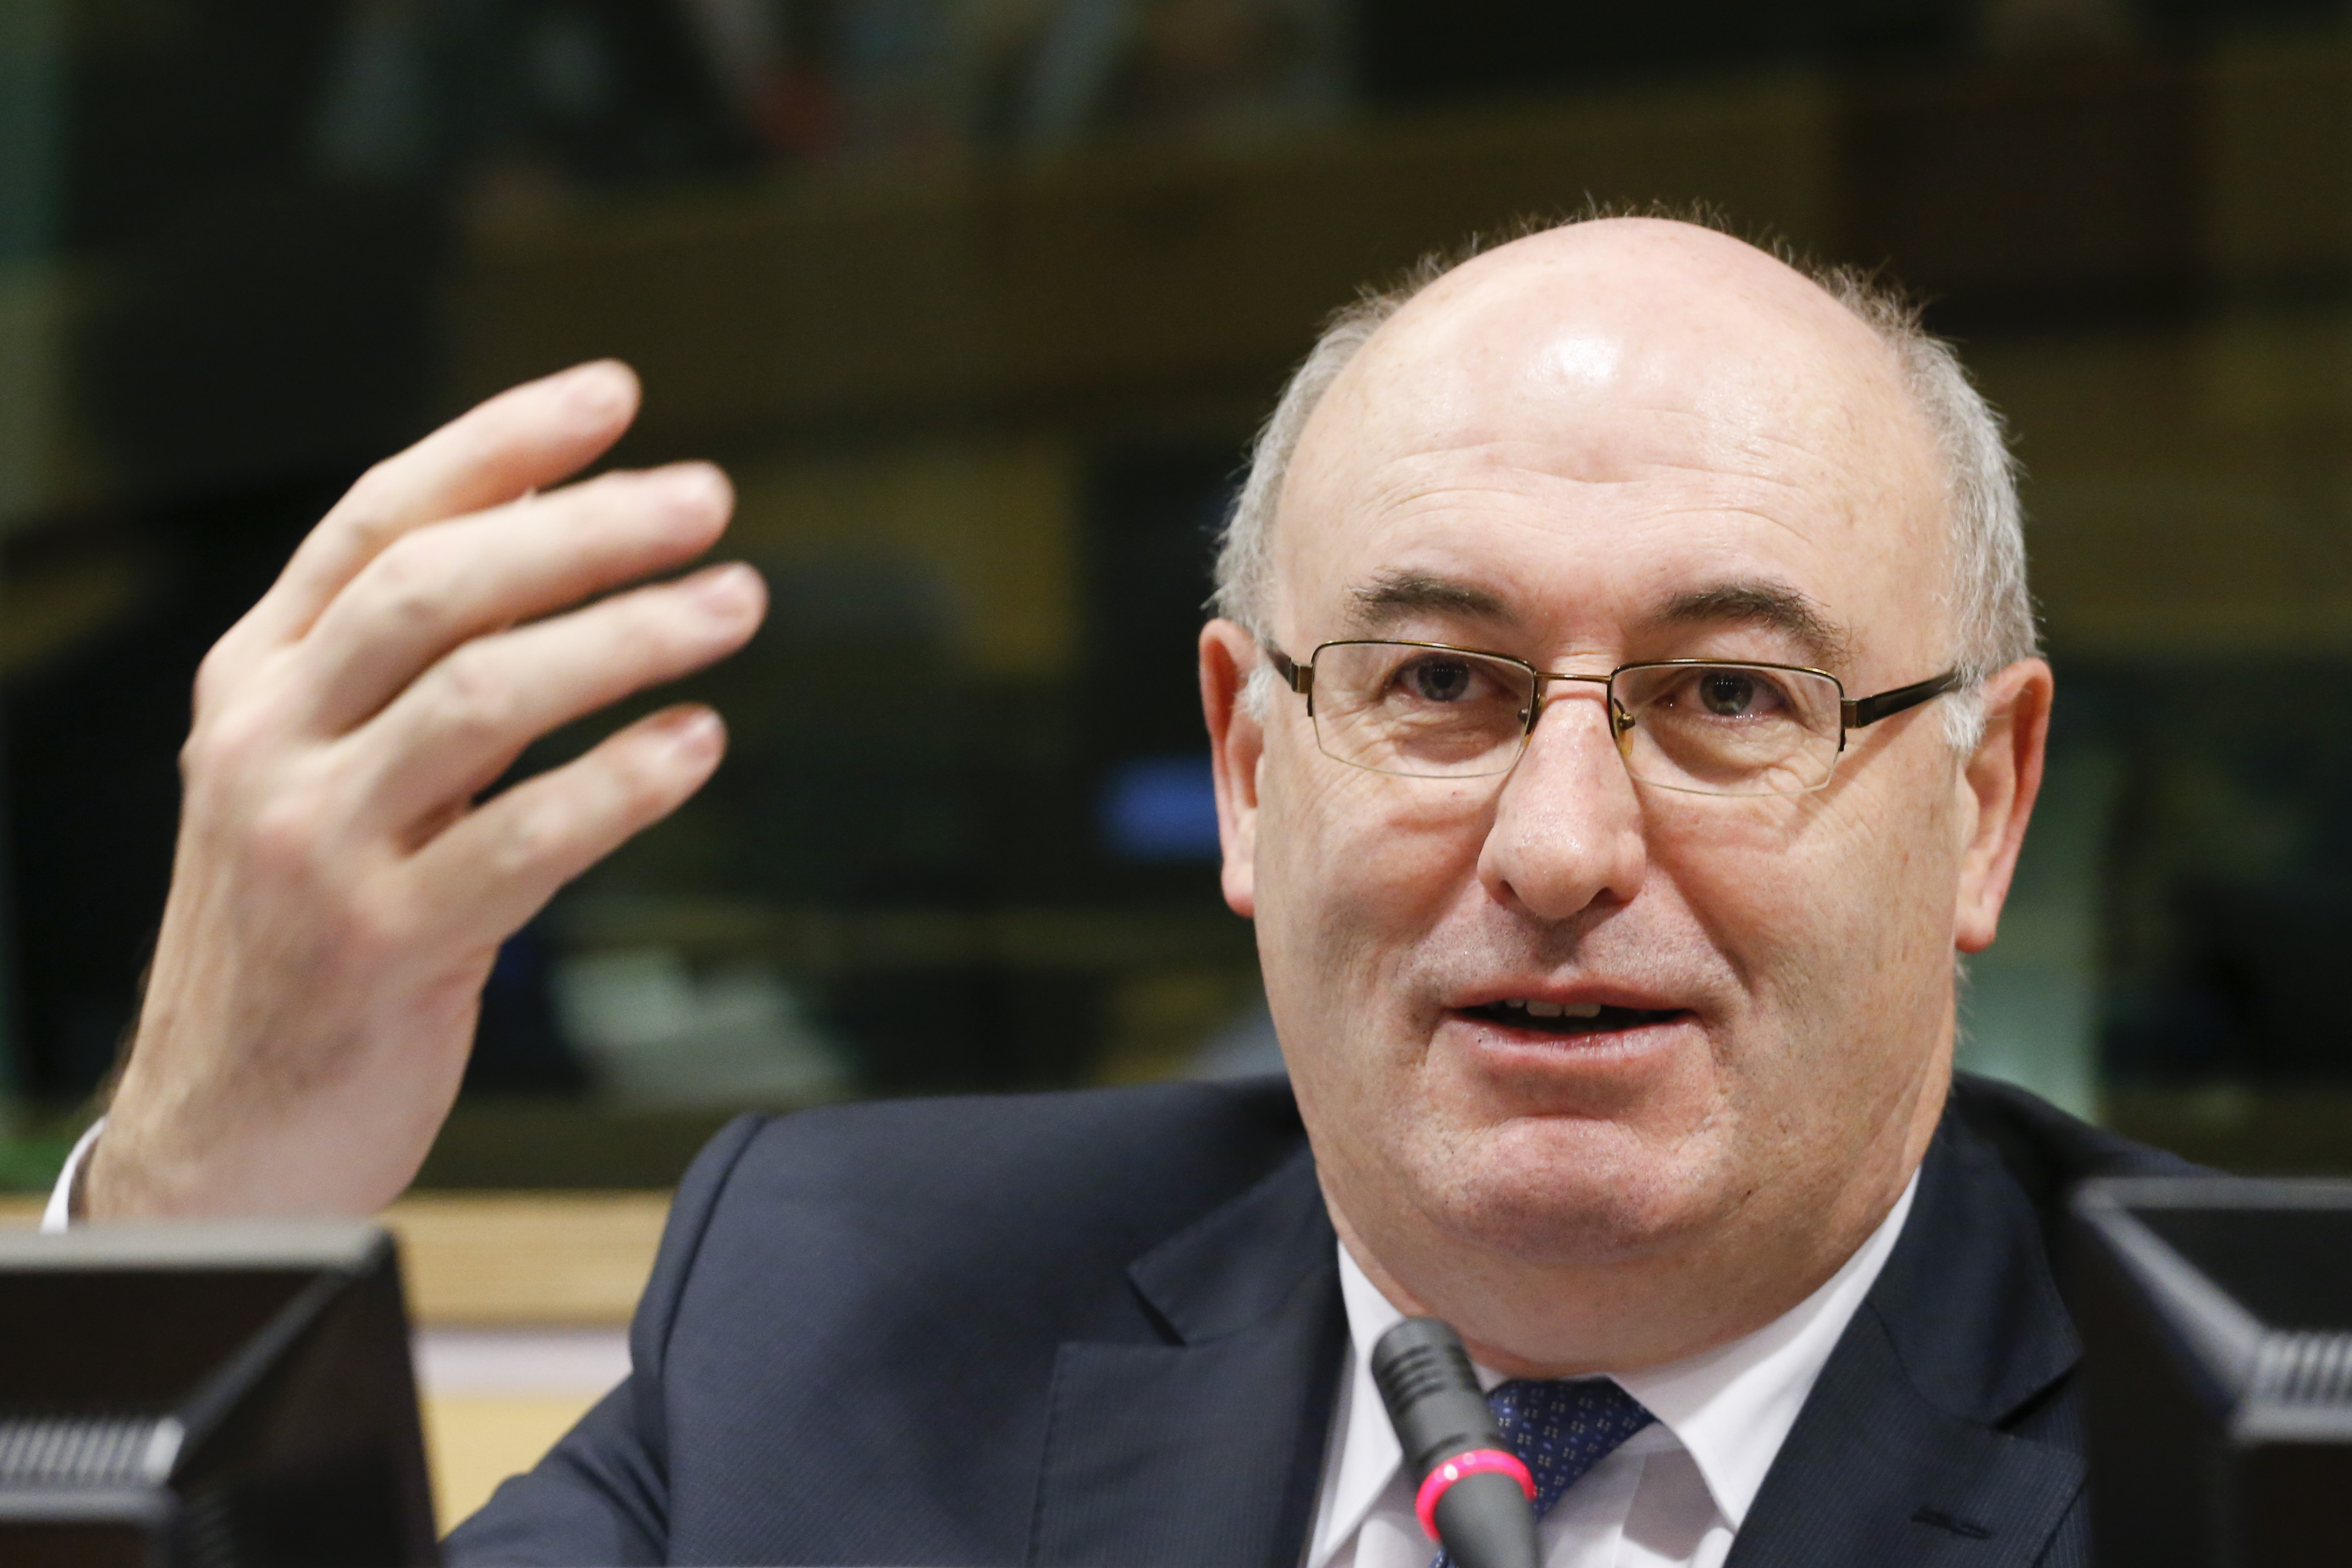 Phil Hogan will be responsible for concluding any new trade deal between the UK and EU-27